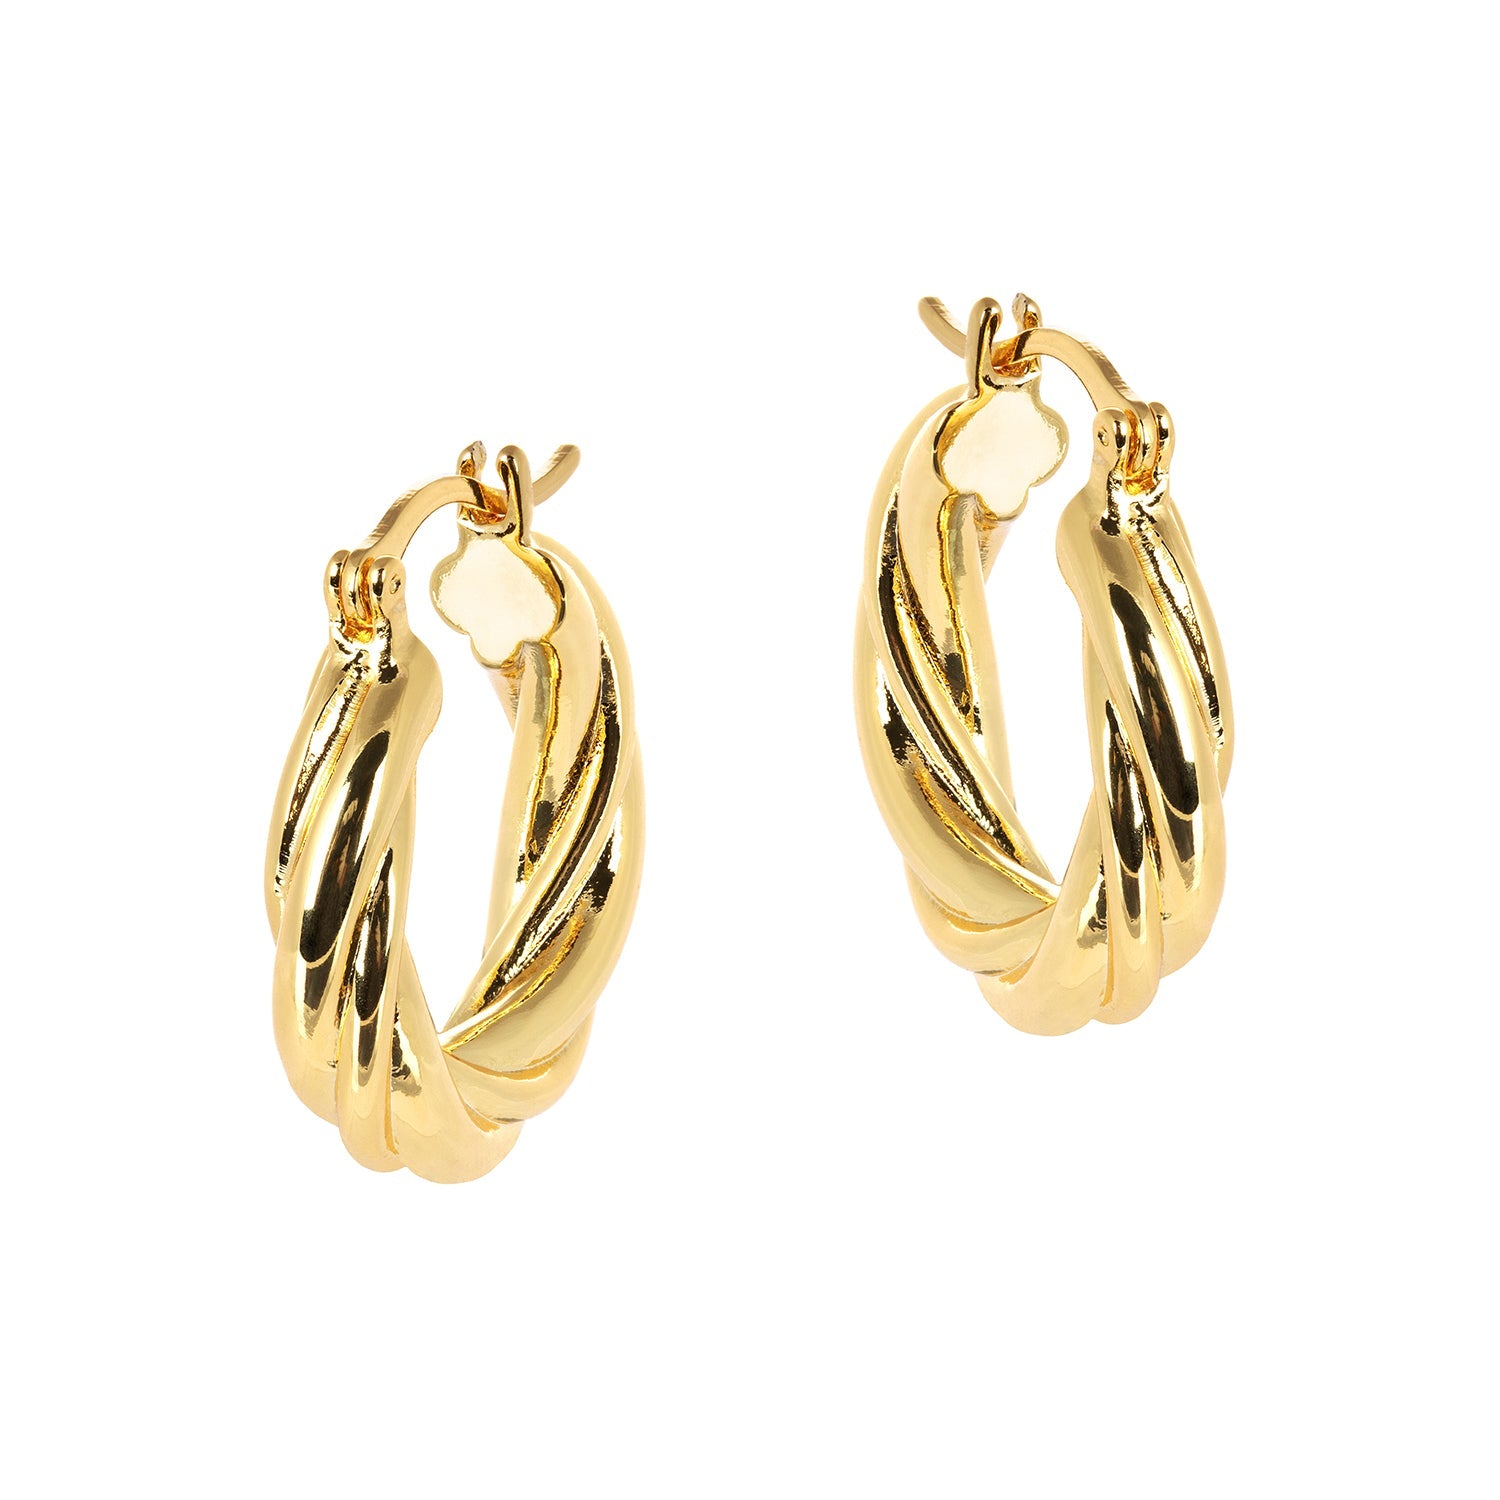 Lilly Thin Twisted Gold Hoop Earrings